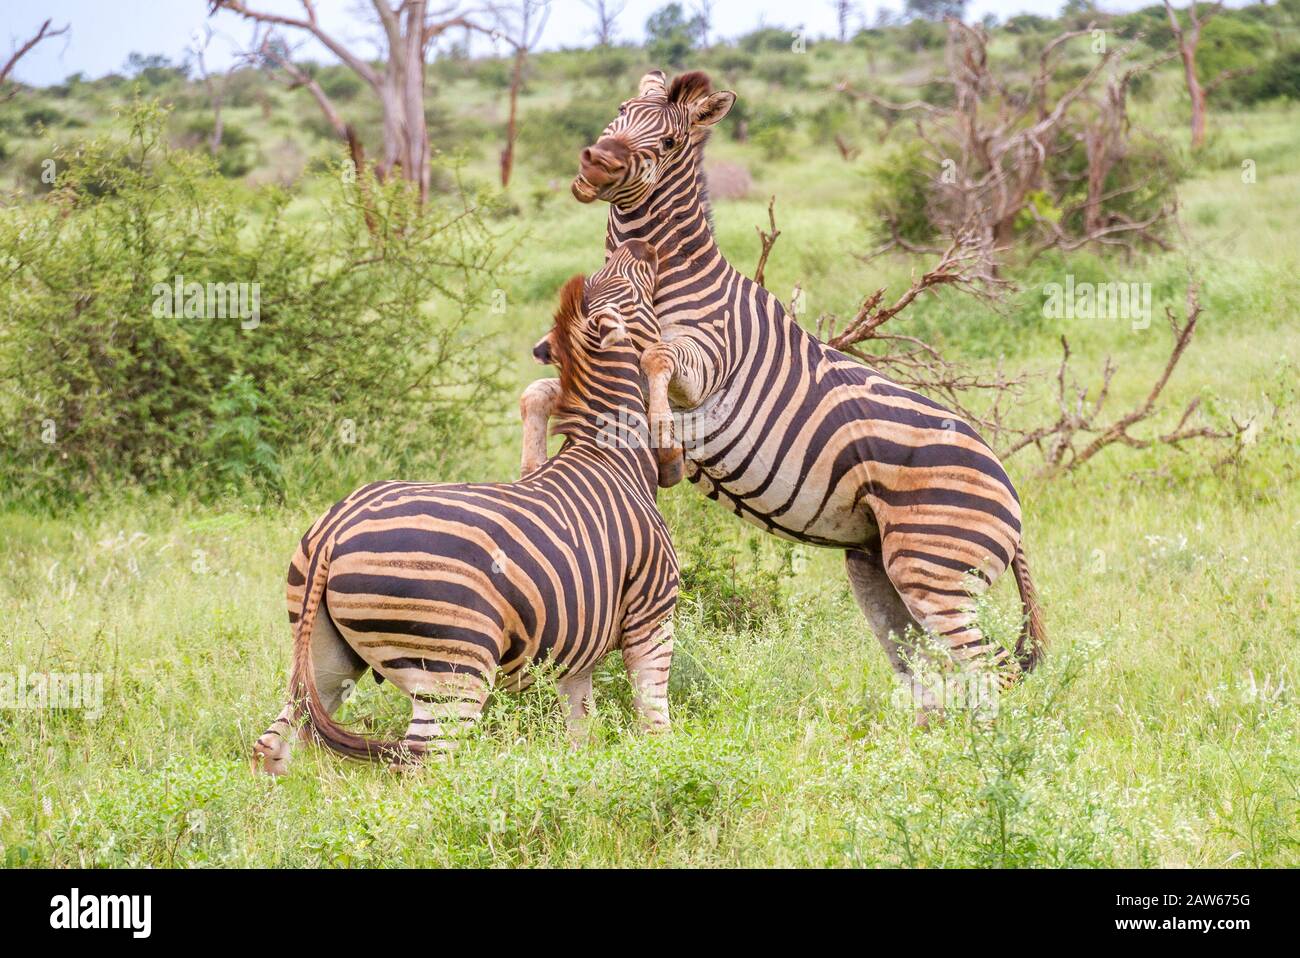 Two burchell's zebras isolated interacting in the African bush image in horizontal format Stock Photo